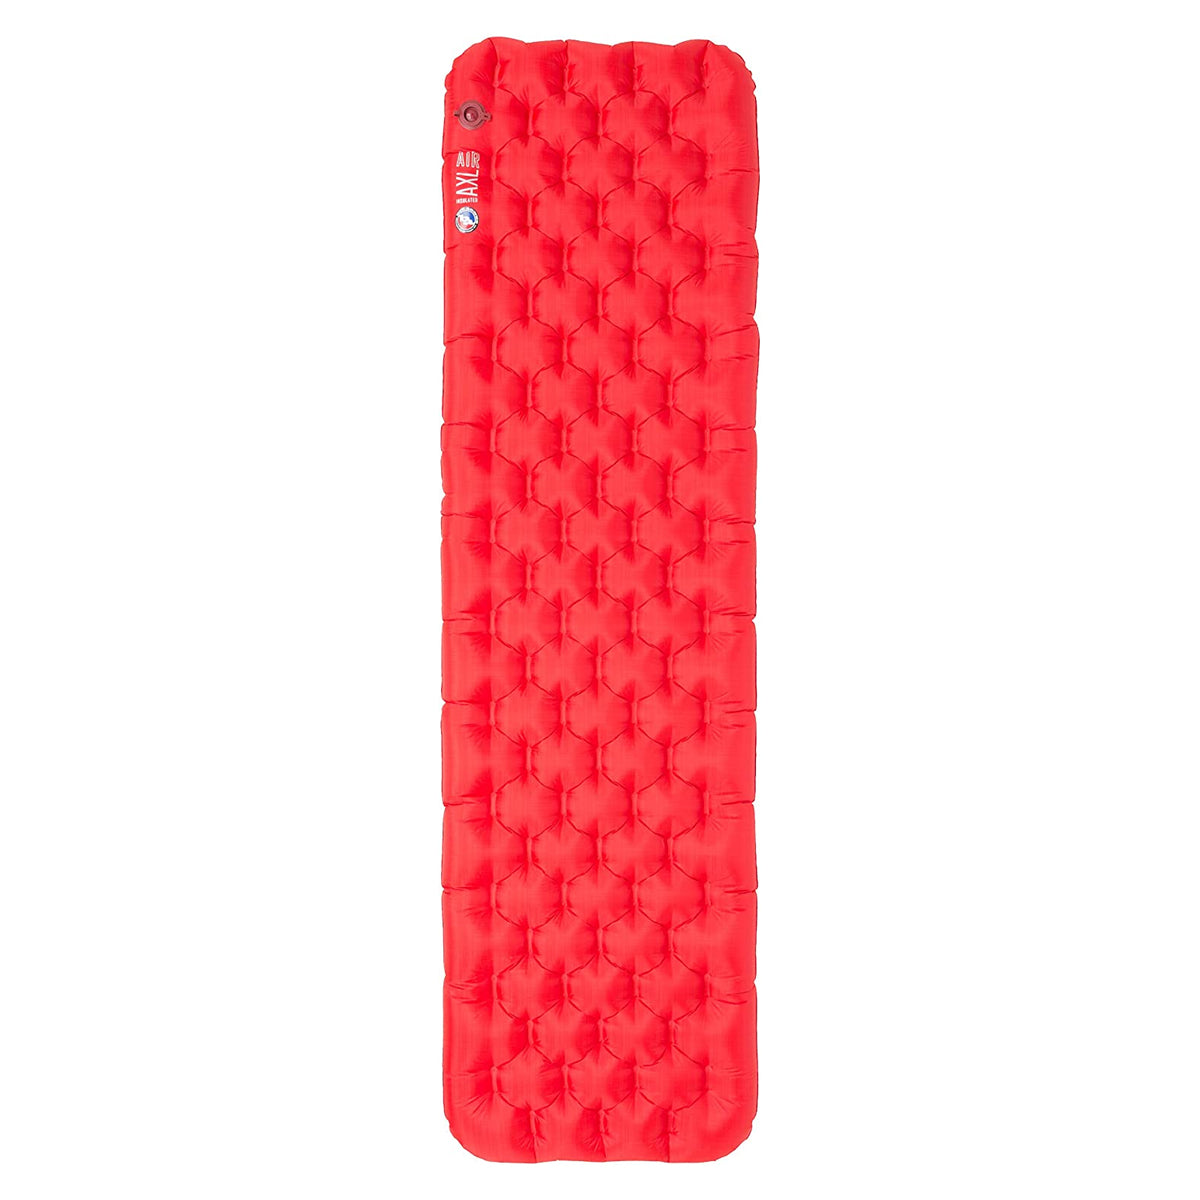 Big Agnes Insulated AXL Sleeping Pad in  by GOHUNT | Big Agnes - GOHUNT Shop